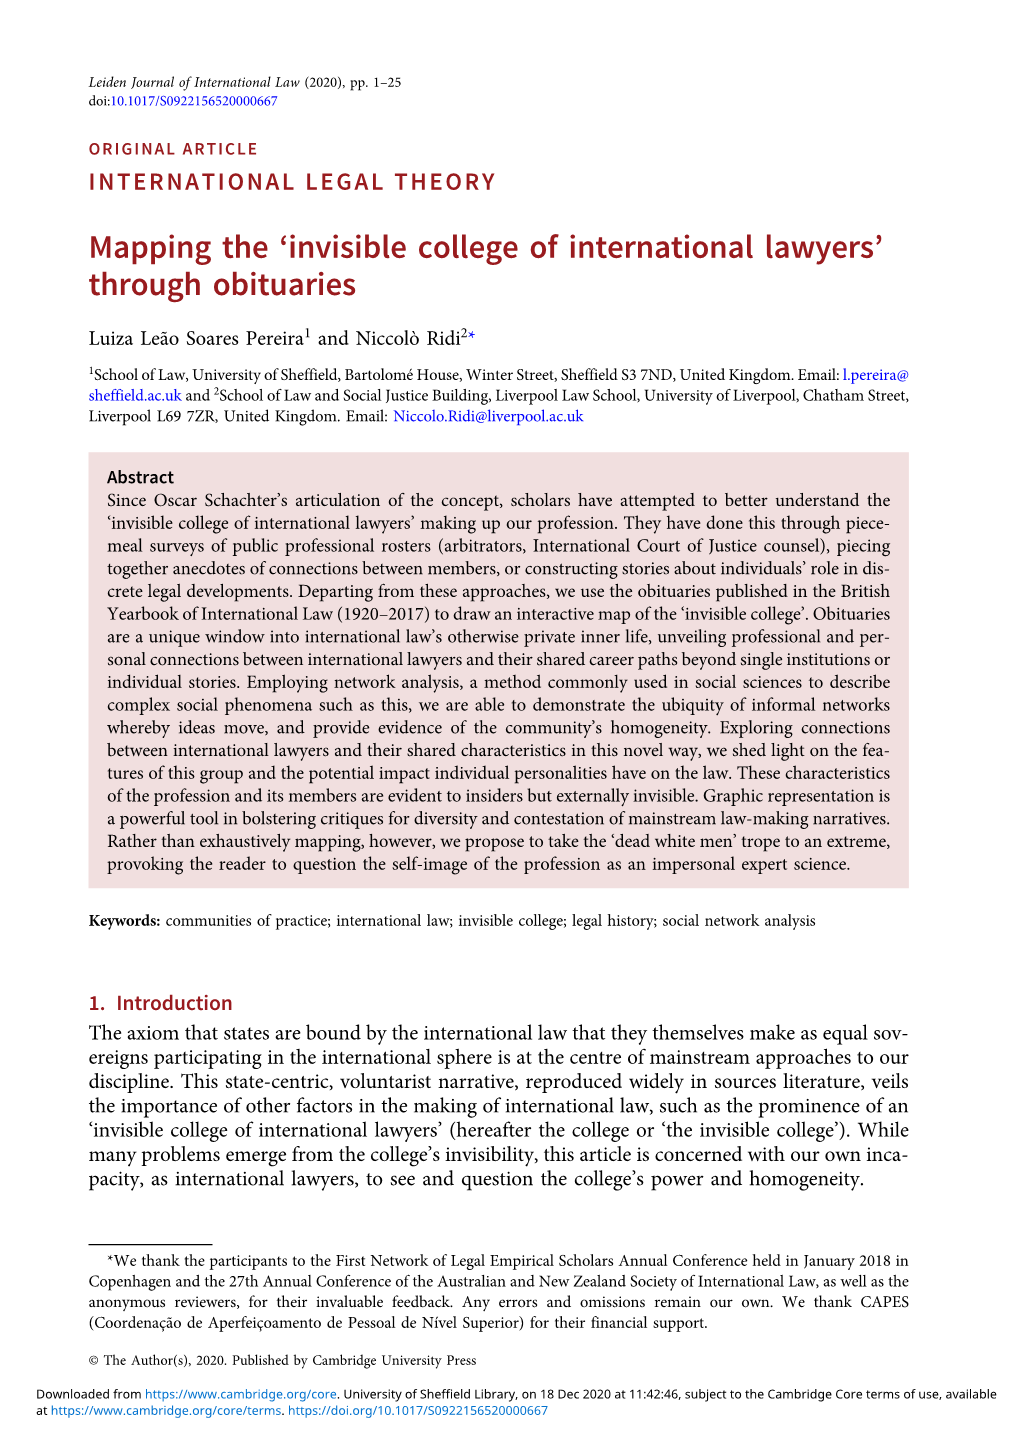 Mapping the `Invisible College of International Lawyers' Through